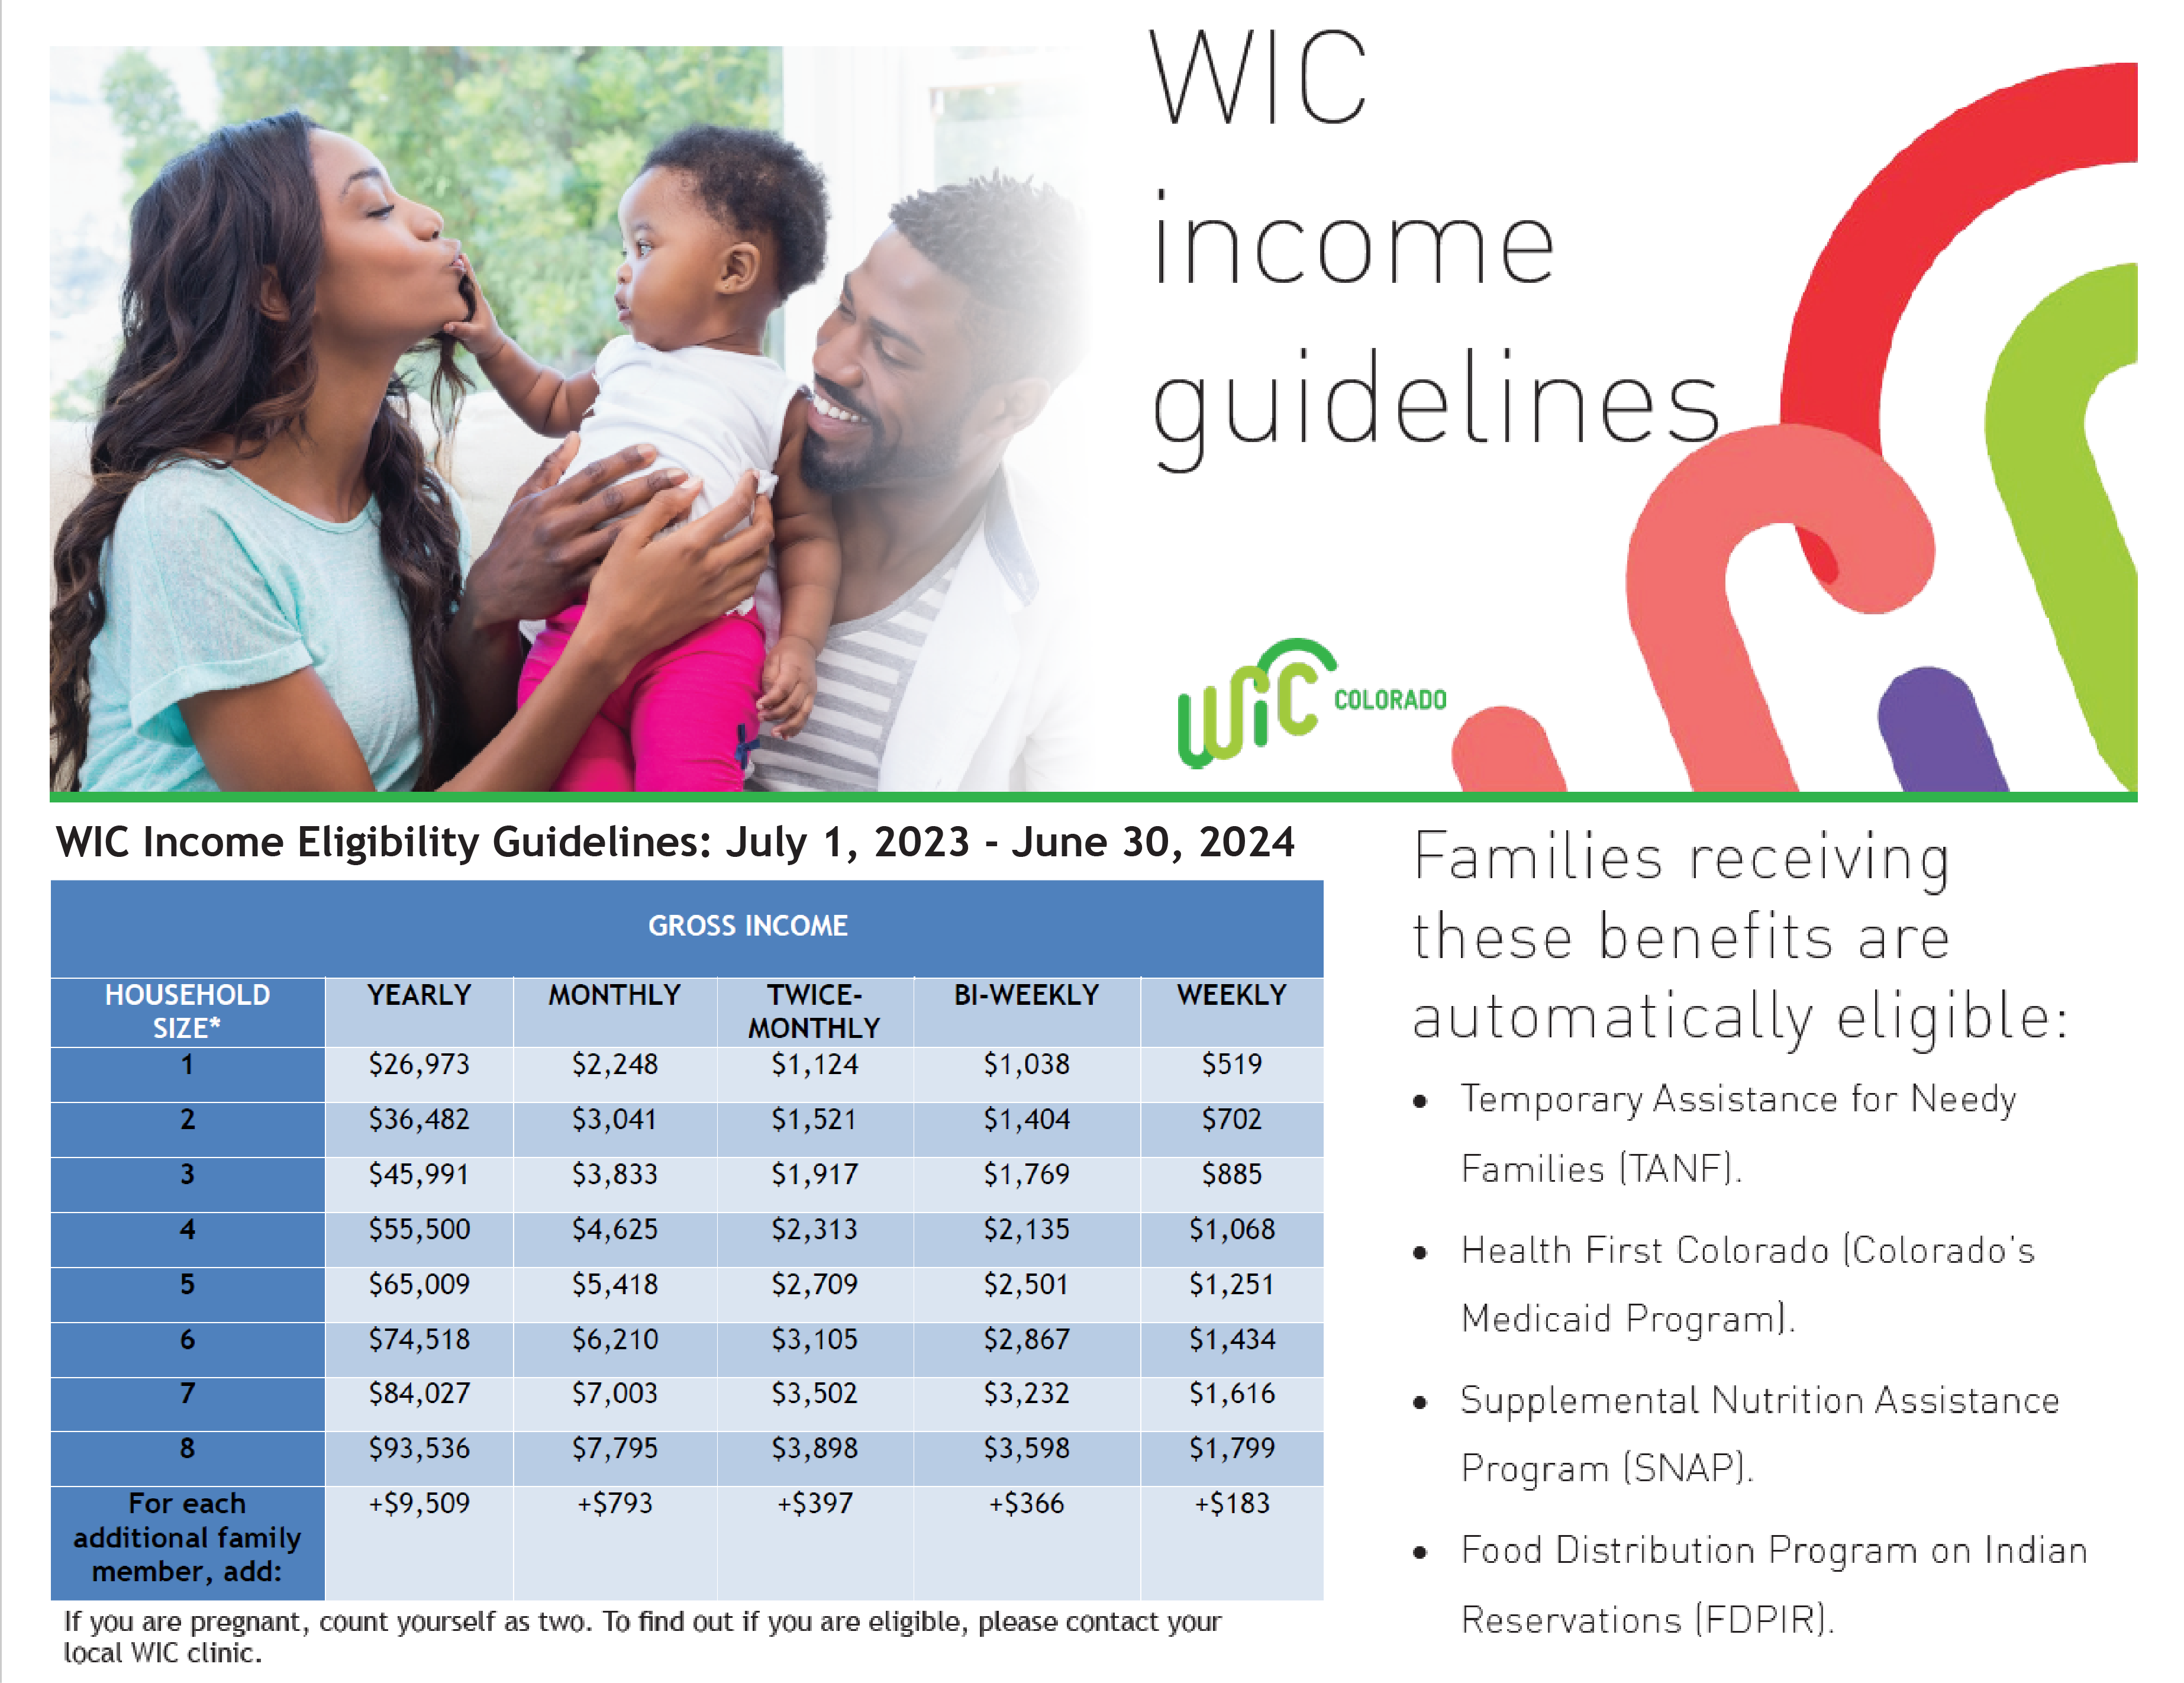 WIC Income Eligibility Guidelines 2023-2024